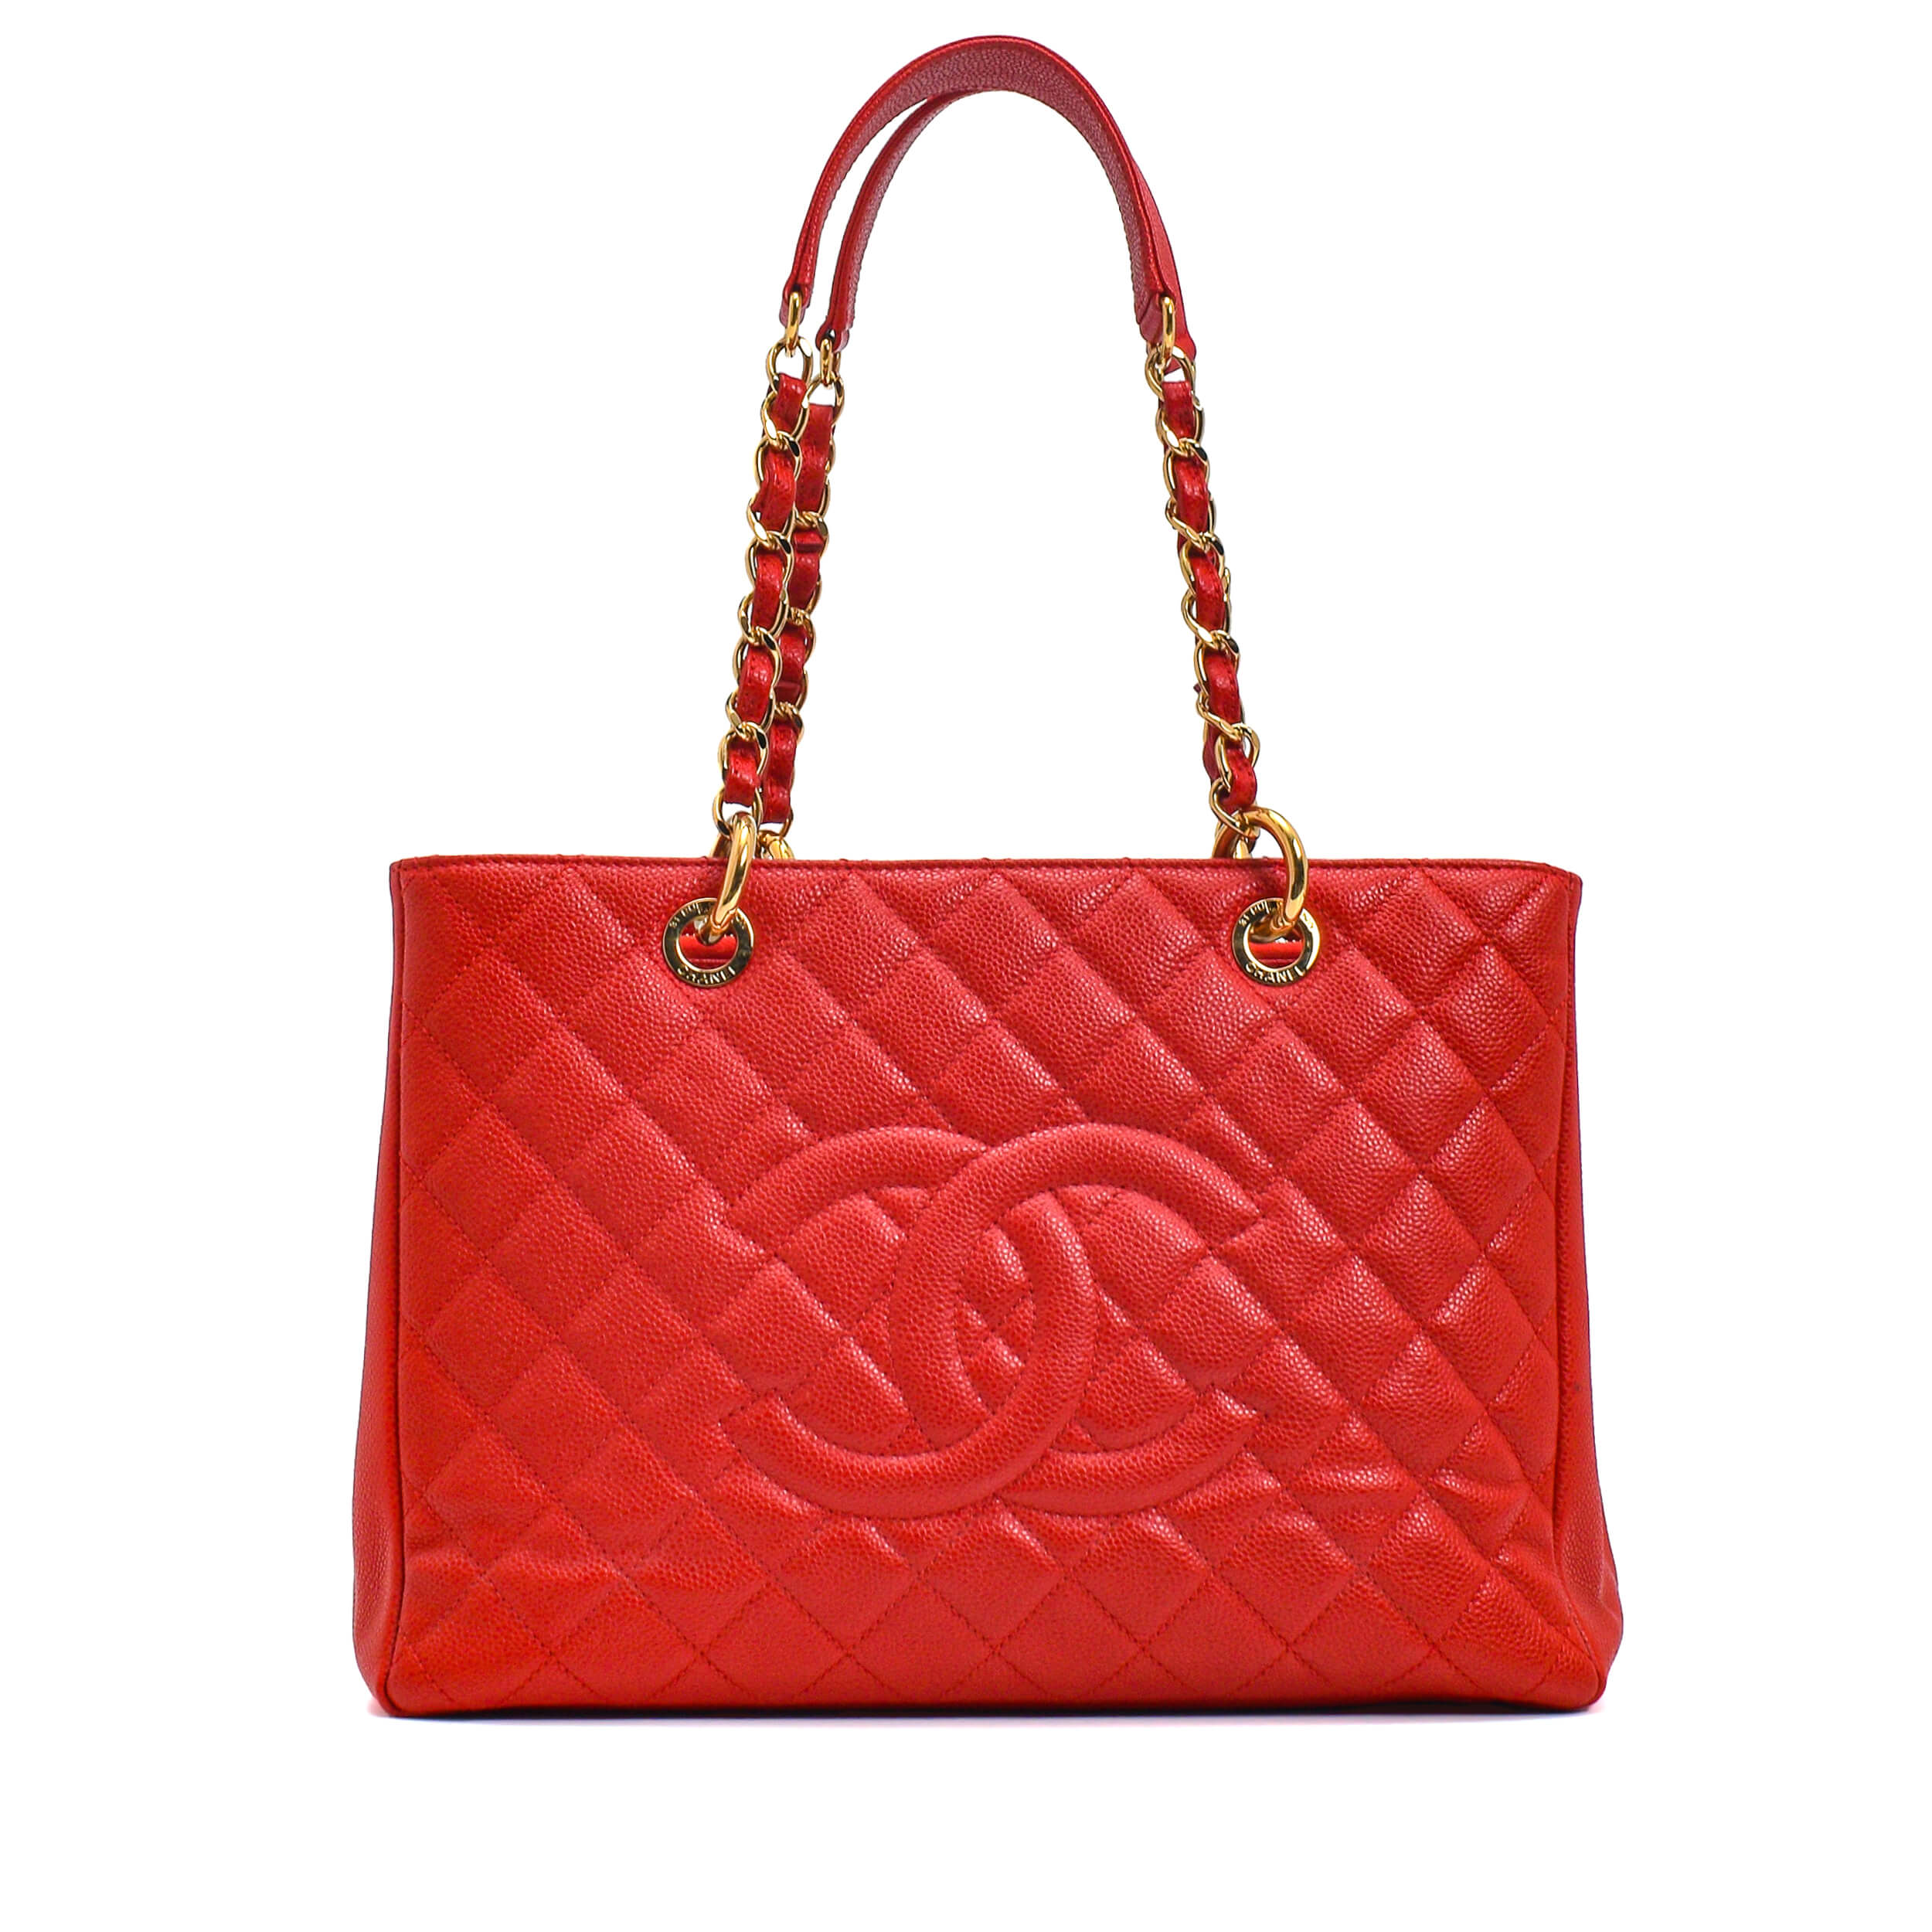 Chanel - Red Quilted Covier Leather Medium Shopping Shoulder Bag